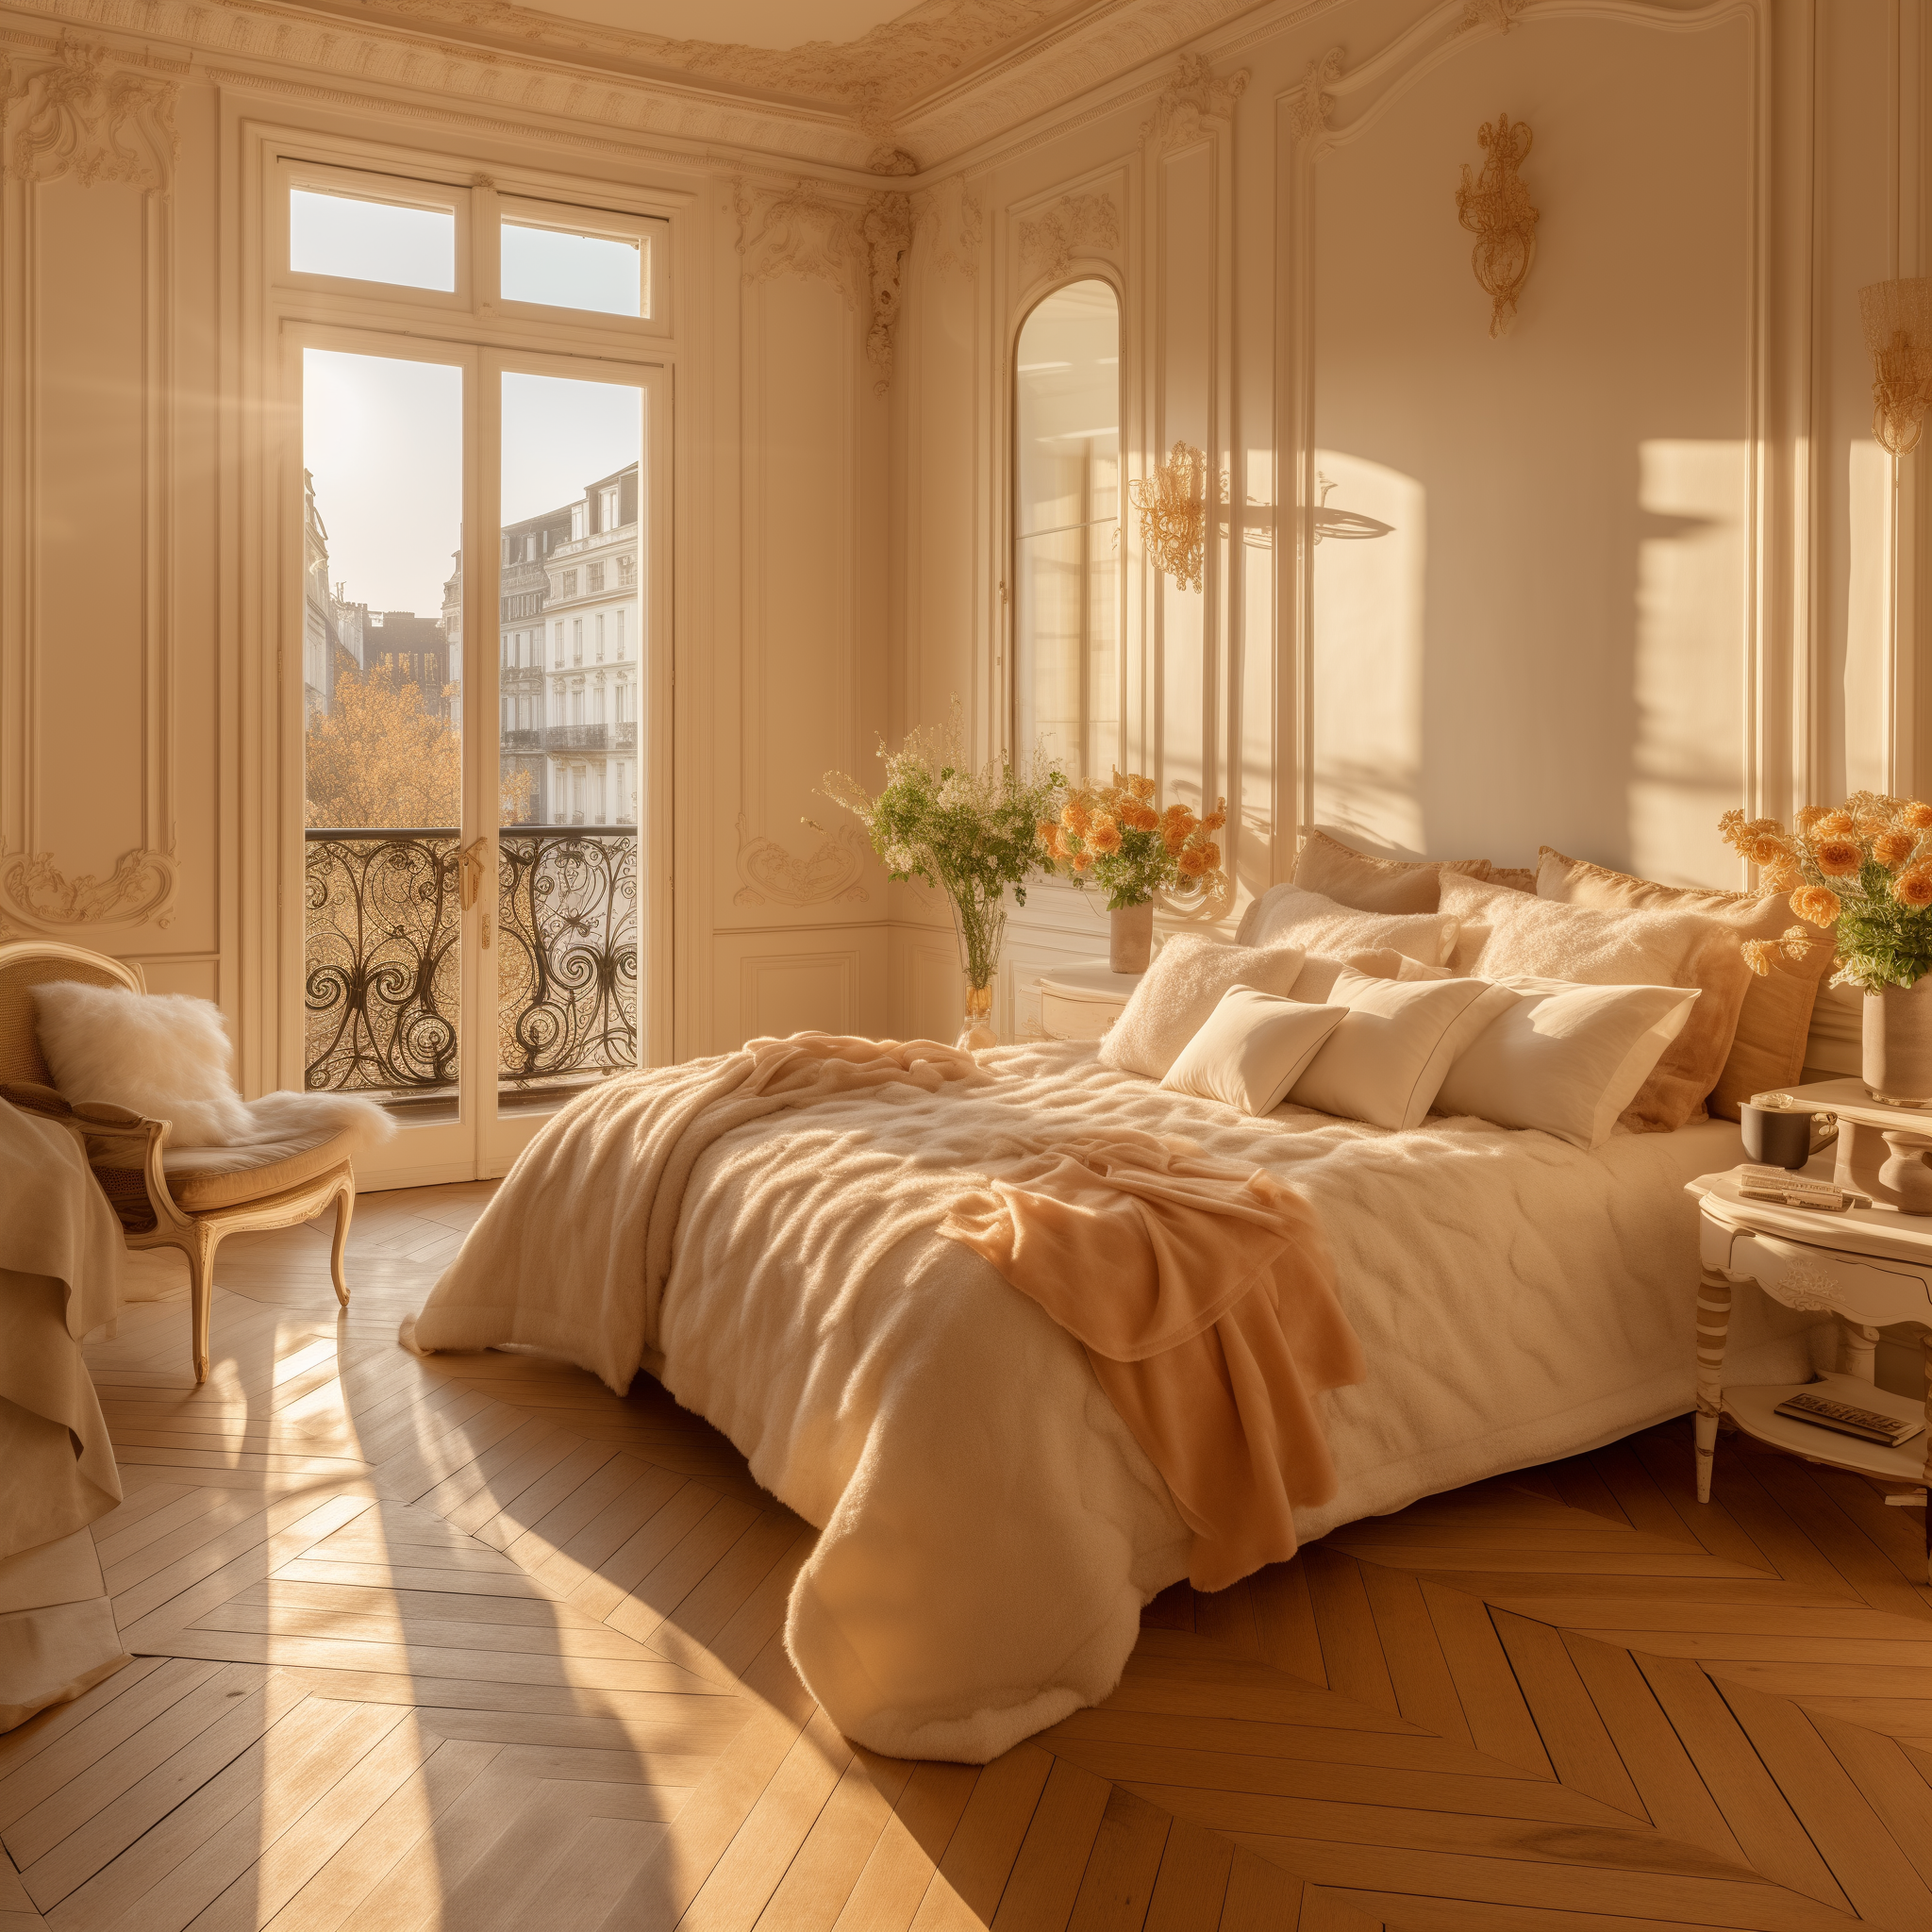 french bedroom aesthetic ideas inspiration decor for small rooms cozy interior design tall ceiling parisian